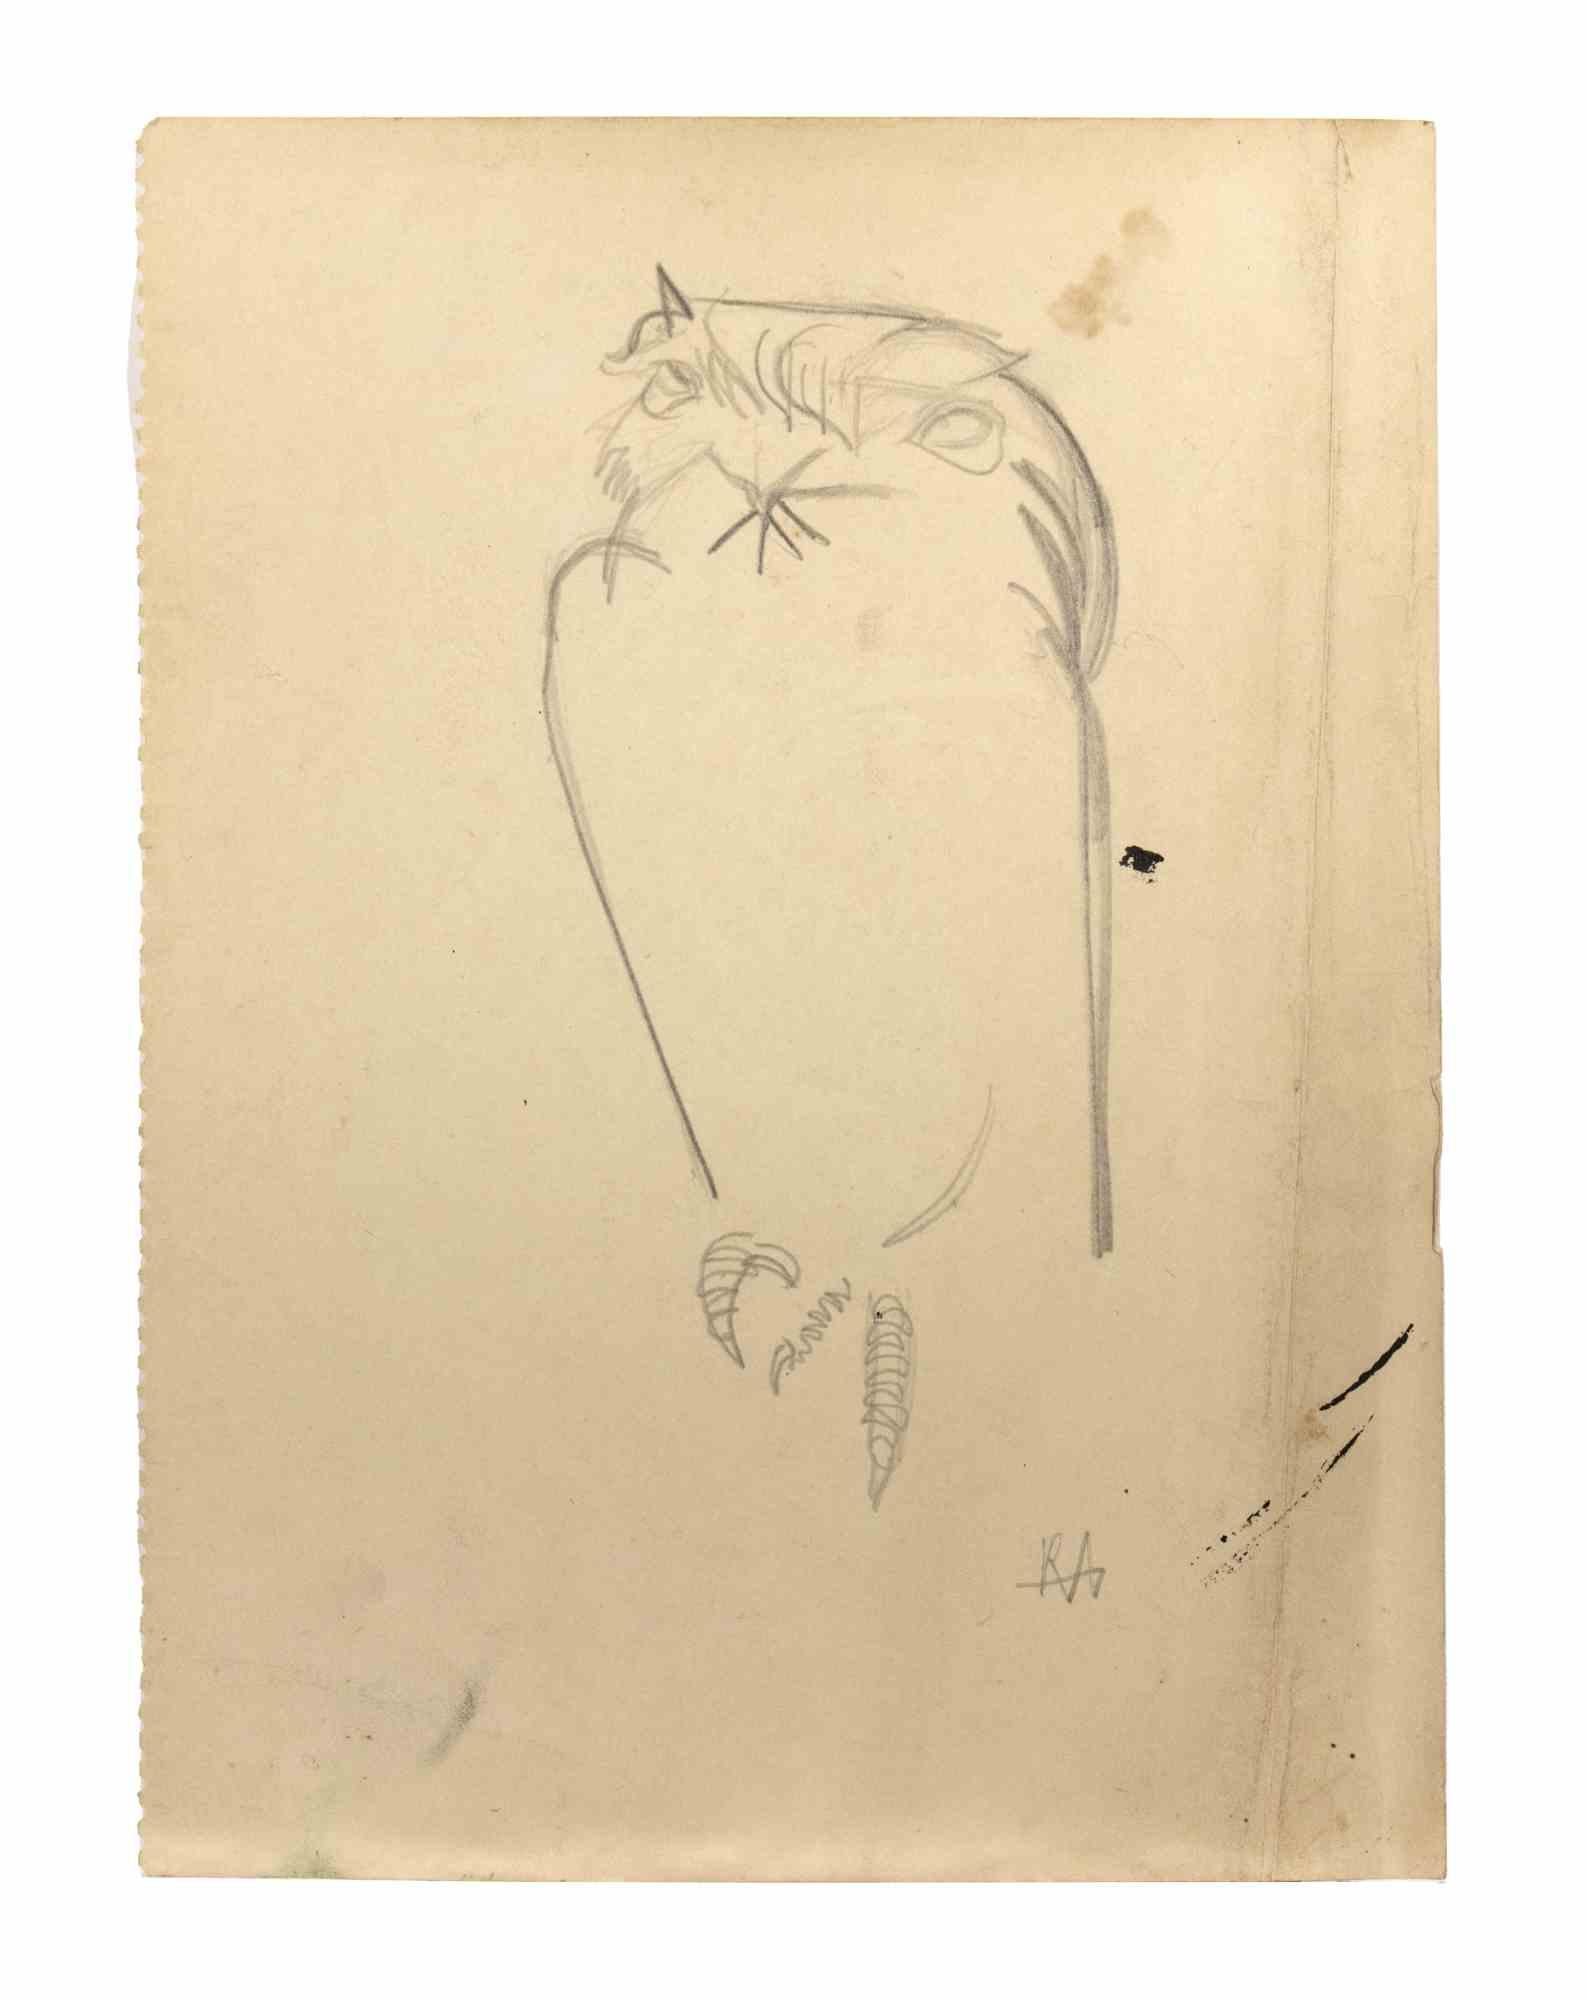 Owl - Drawing By Reynold Arnould - Mid-20th Century